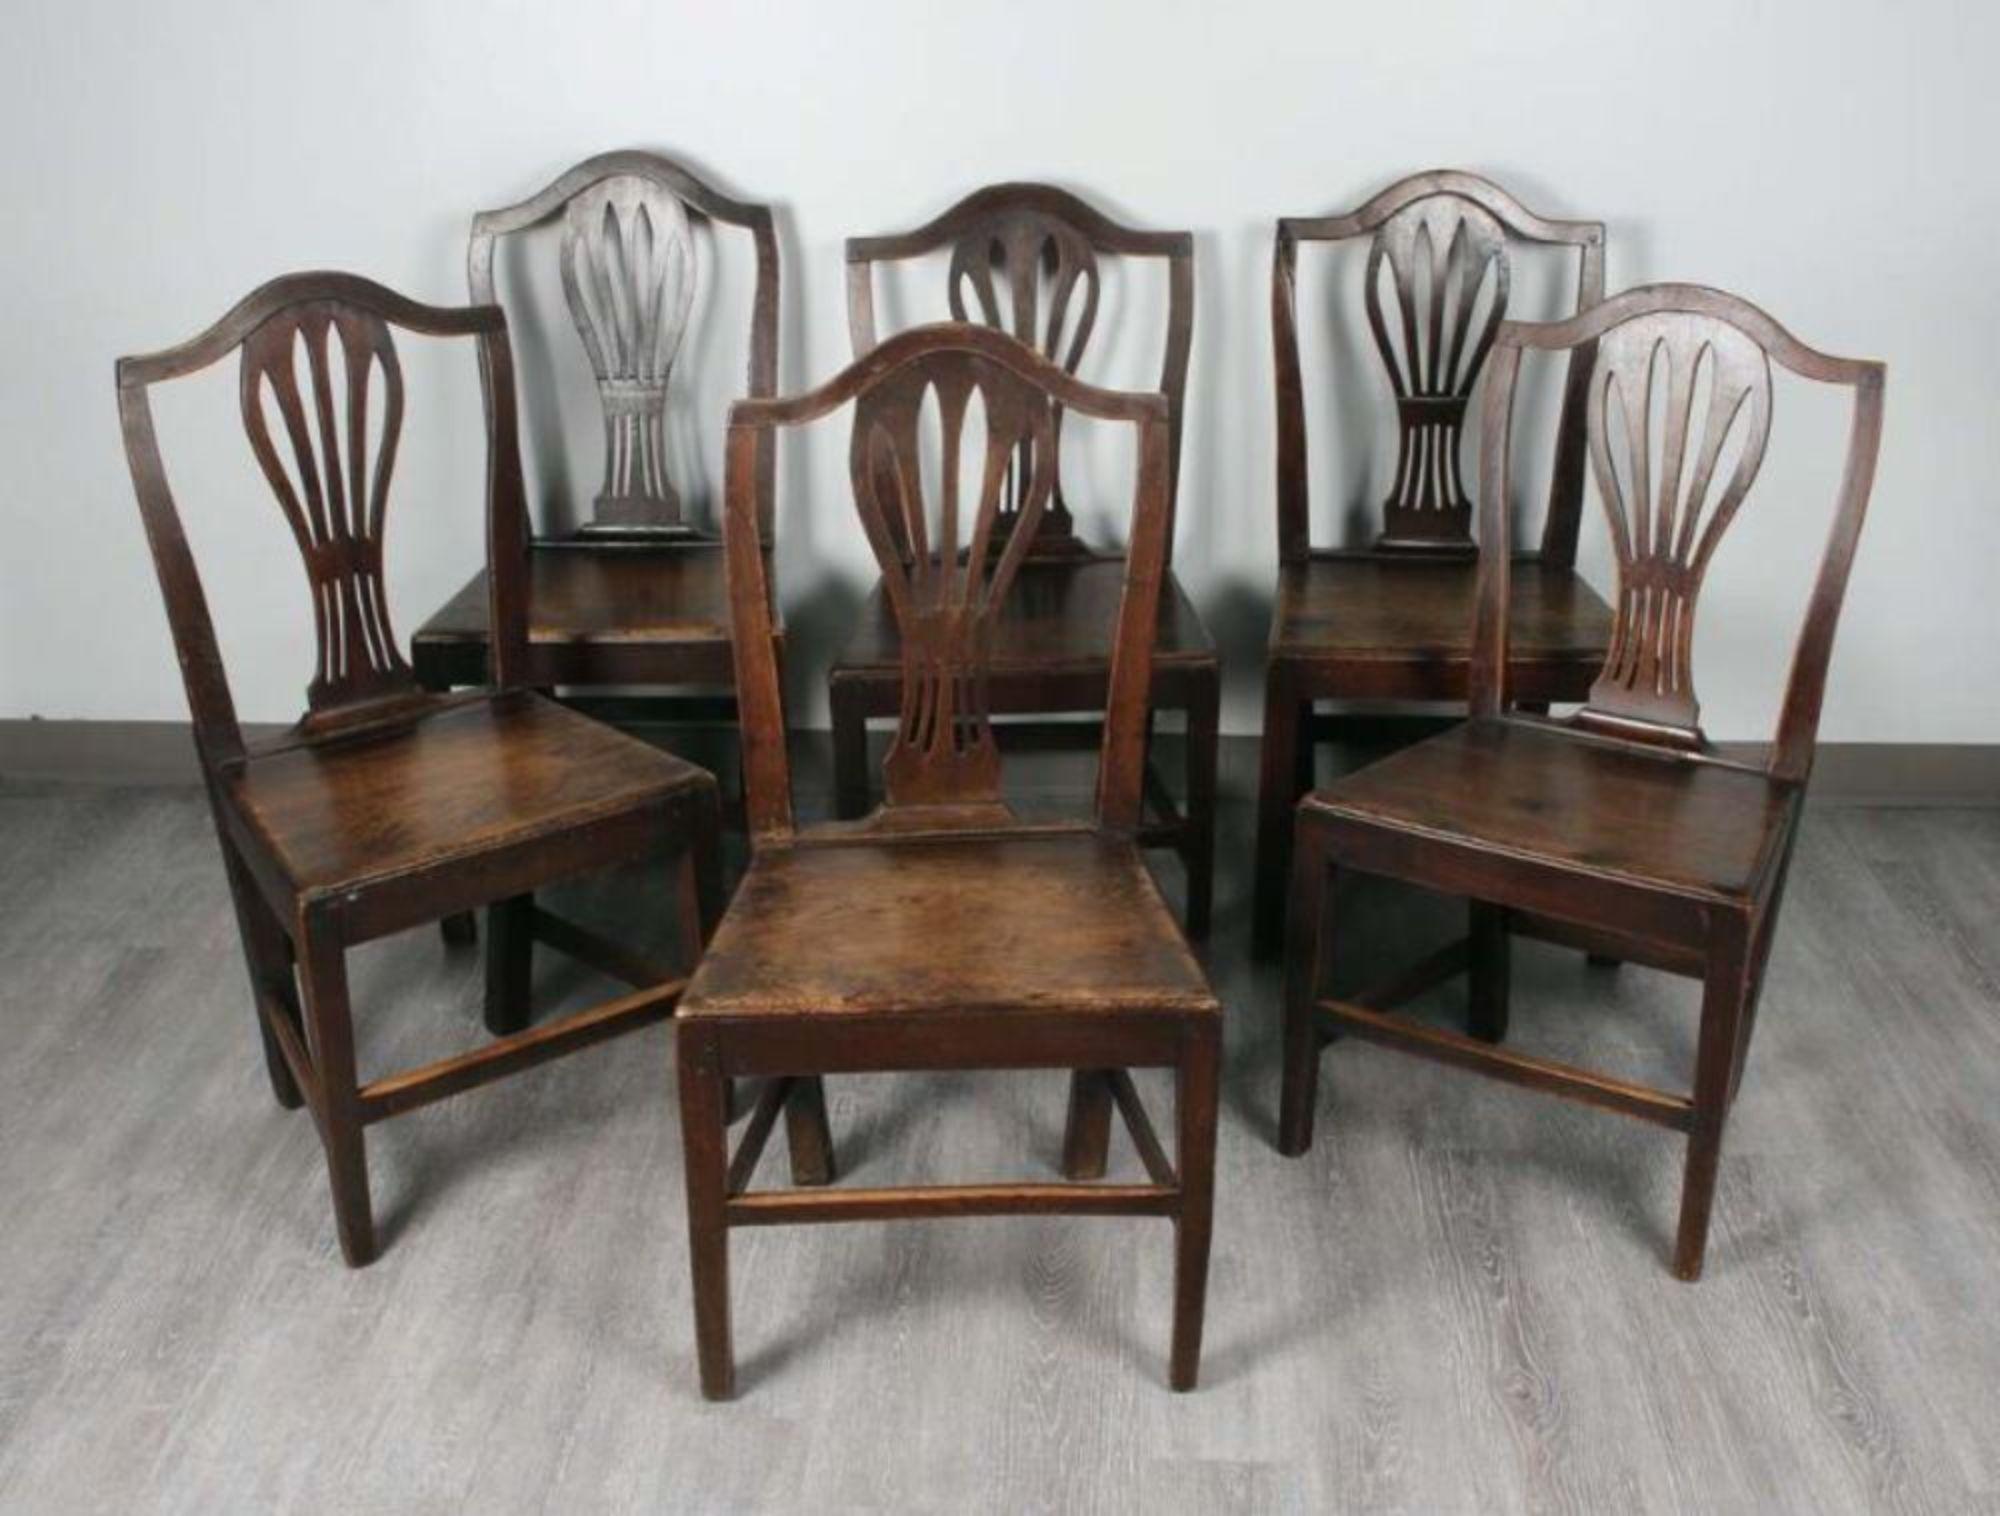 Good assembled set of English country oak Hepplewhite chairs having shield crests over pieced back splats over plank seats, over square tapered legs joined by box stretchers, all of the same design with slight variations in height, but all with good